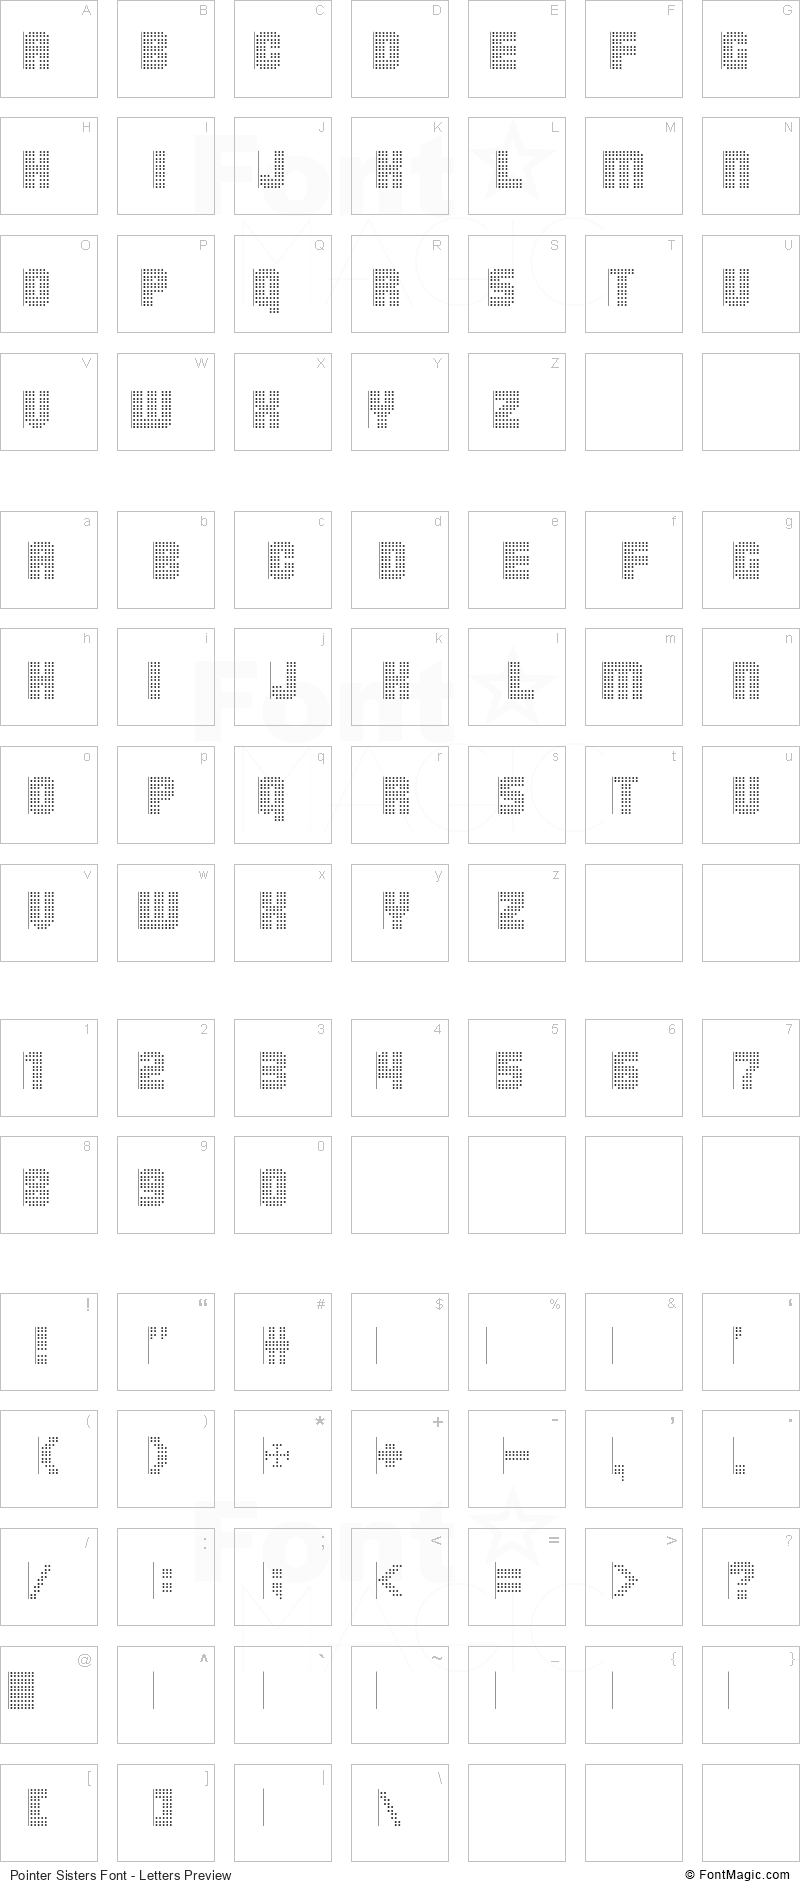 Pointer Sisters Font - All Latters Preview Chart